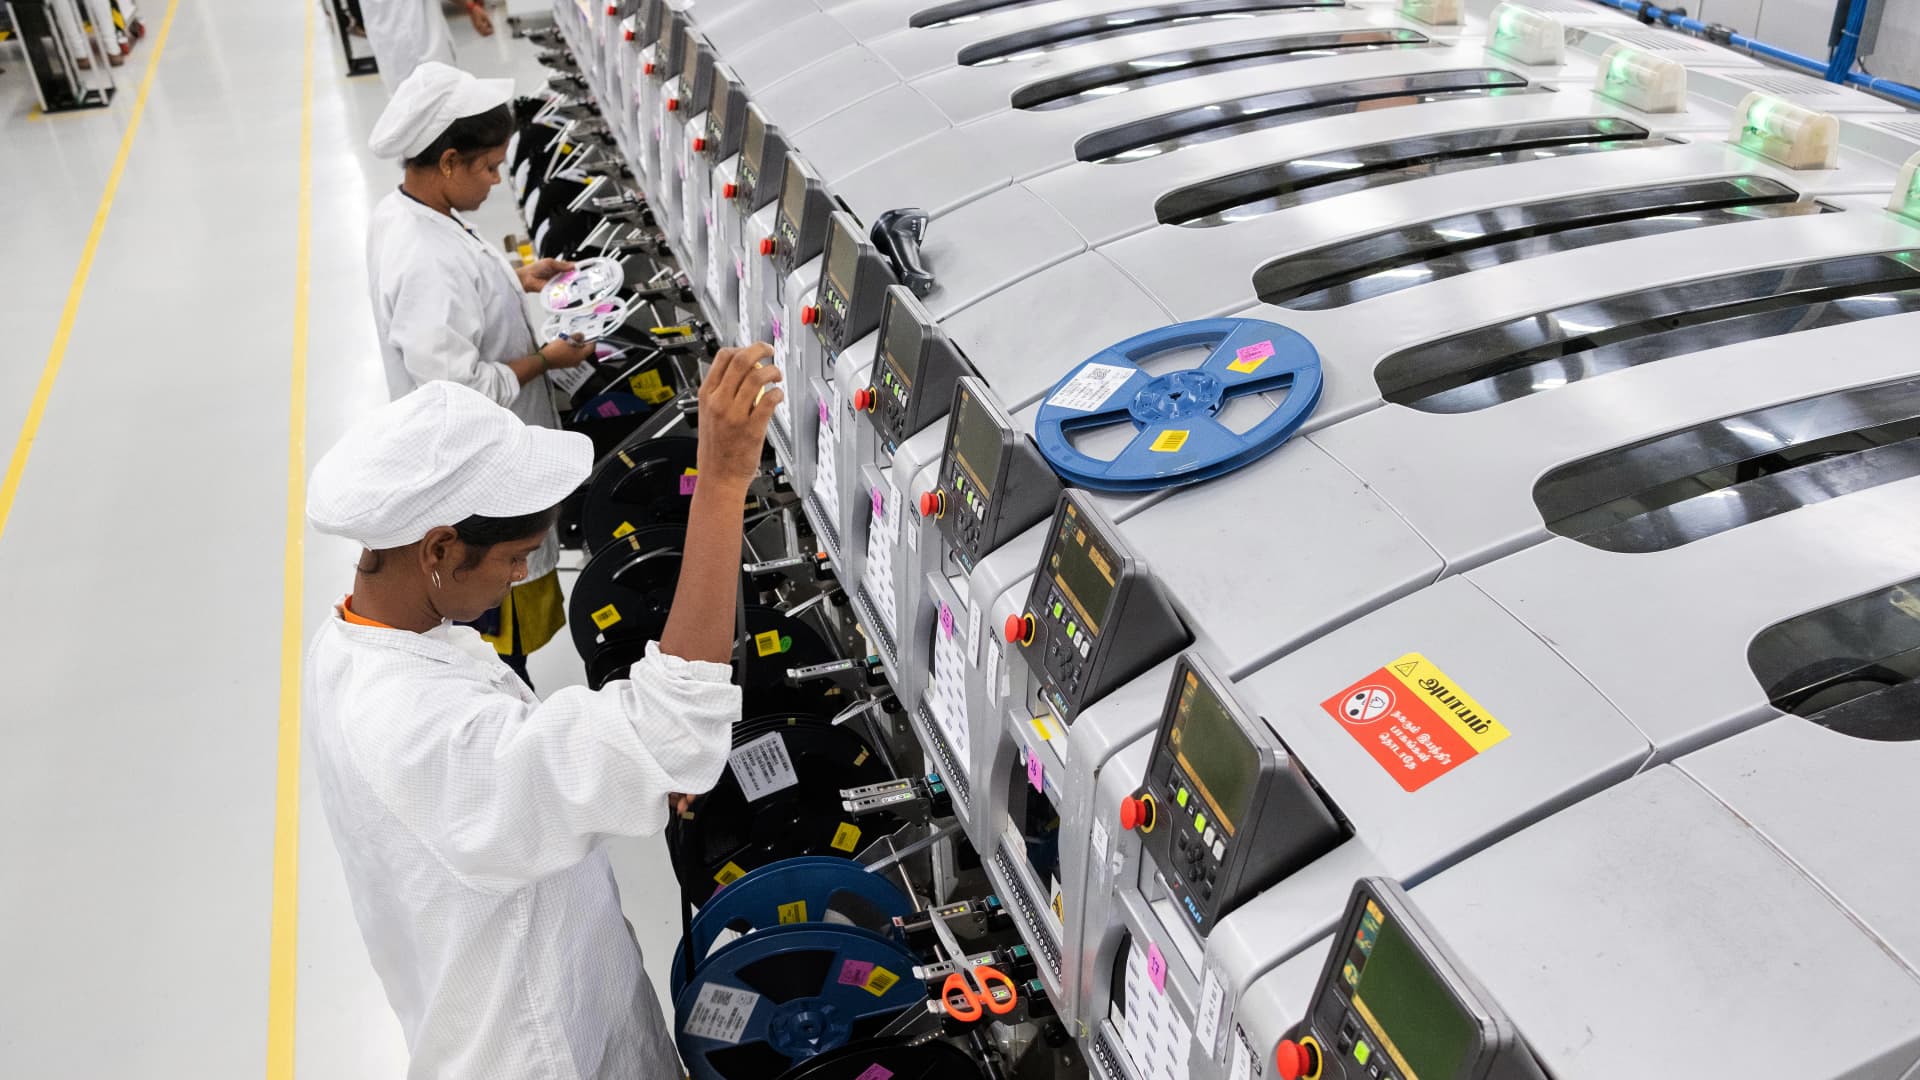 Apple supplier Foxconn expects decline in consumer electronics demand, prioritizes global growth